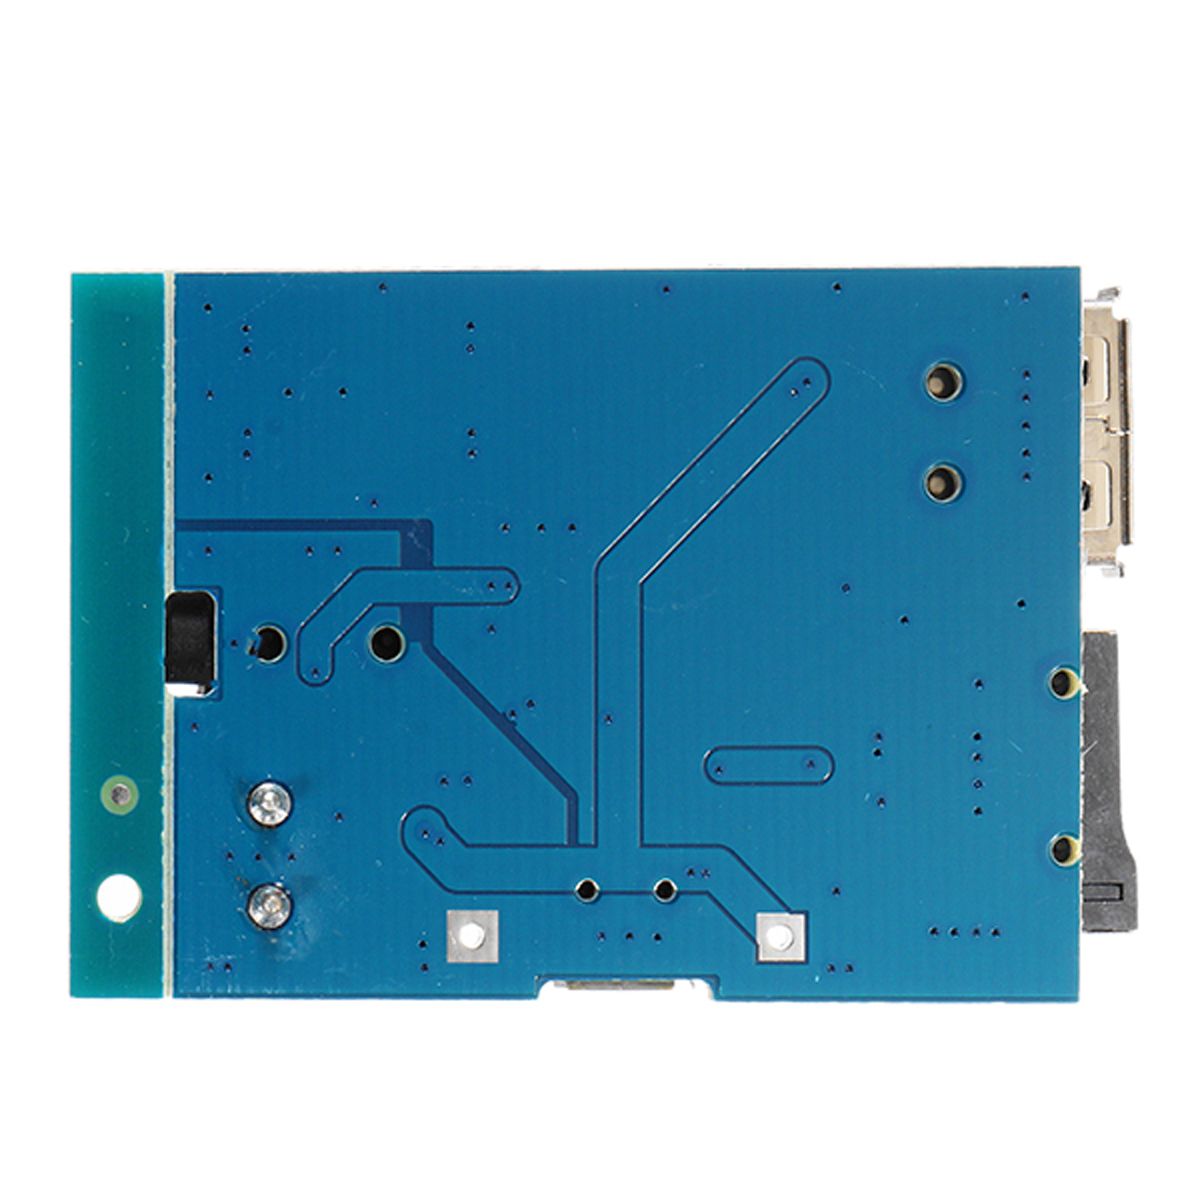 30pcs-MP3-Lossless-Decoder-Board-With-Power-Amplifier-Module-TF-Card-Decoding-Player-1366968